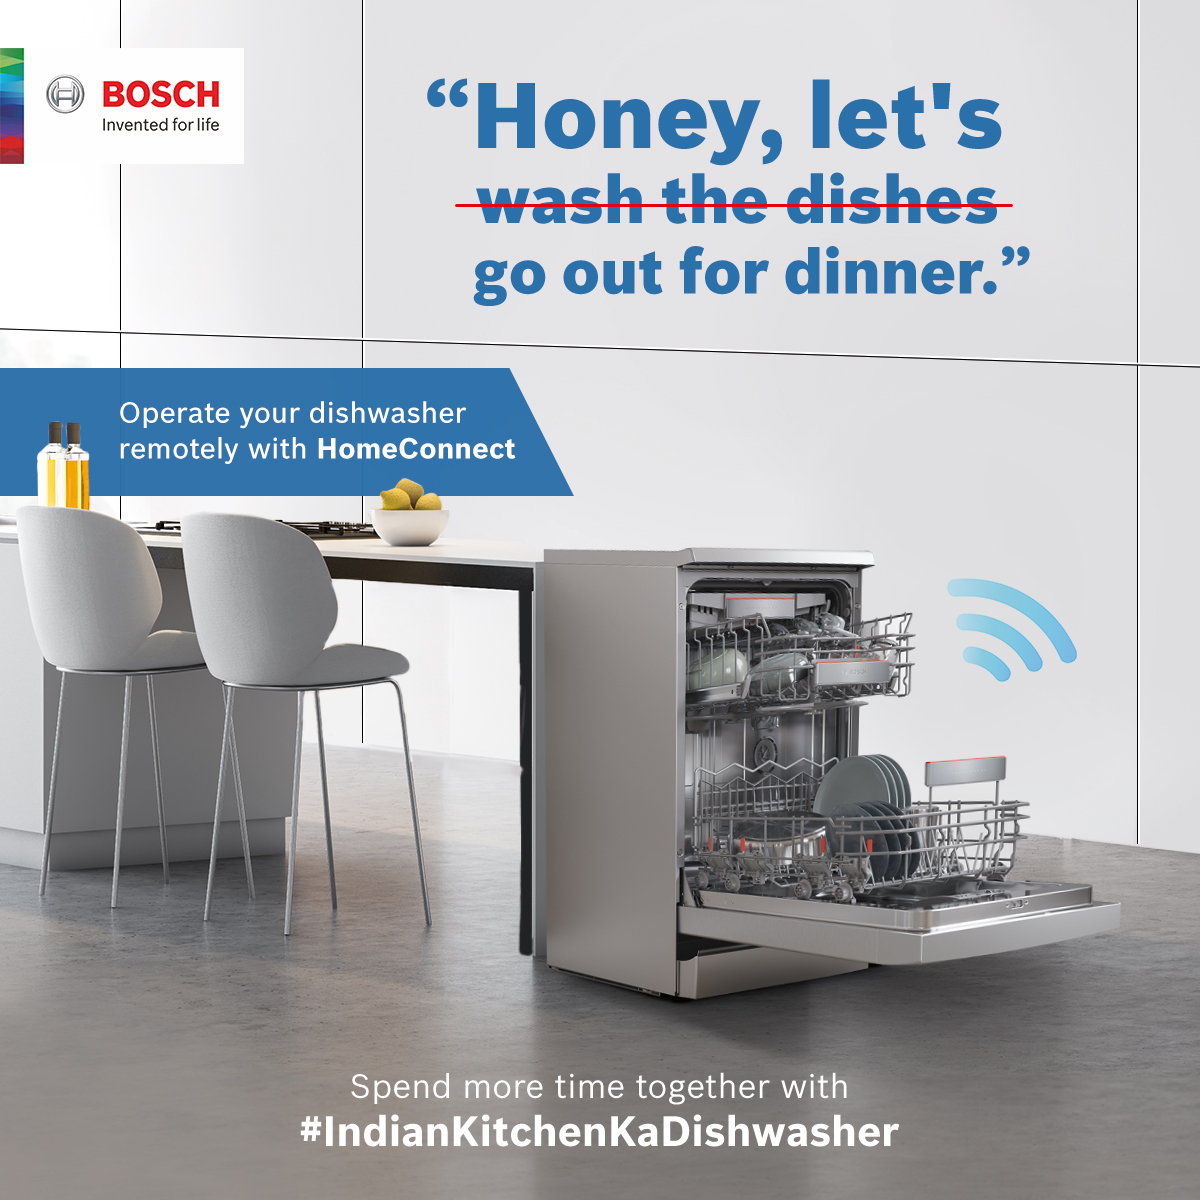 The innovative HomeConnect app helps you operate and control the Bosch dishwasher from anywhere. So now you don't have to be home to do the dishes.

#IndianKitchenKaDishwasher #BoschHomeIndia #Dishwasher #SmartHome #Innovation